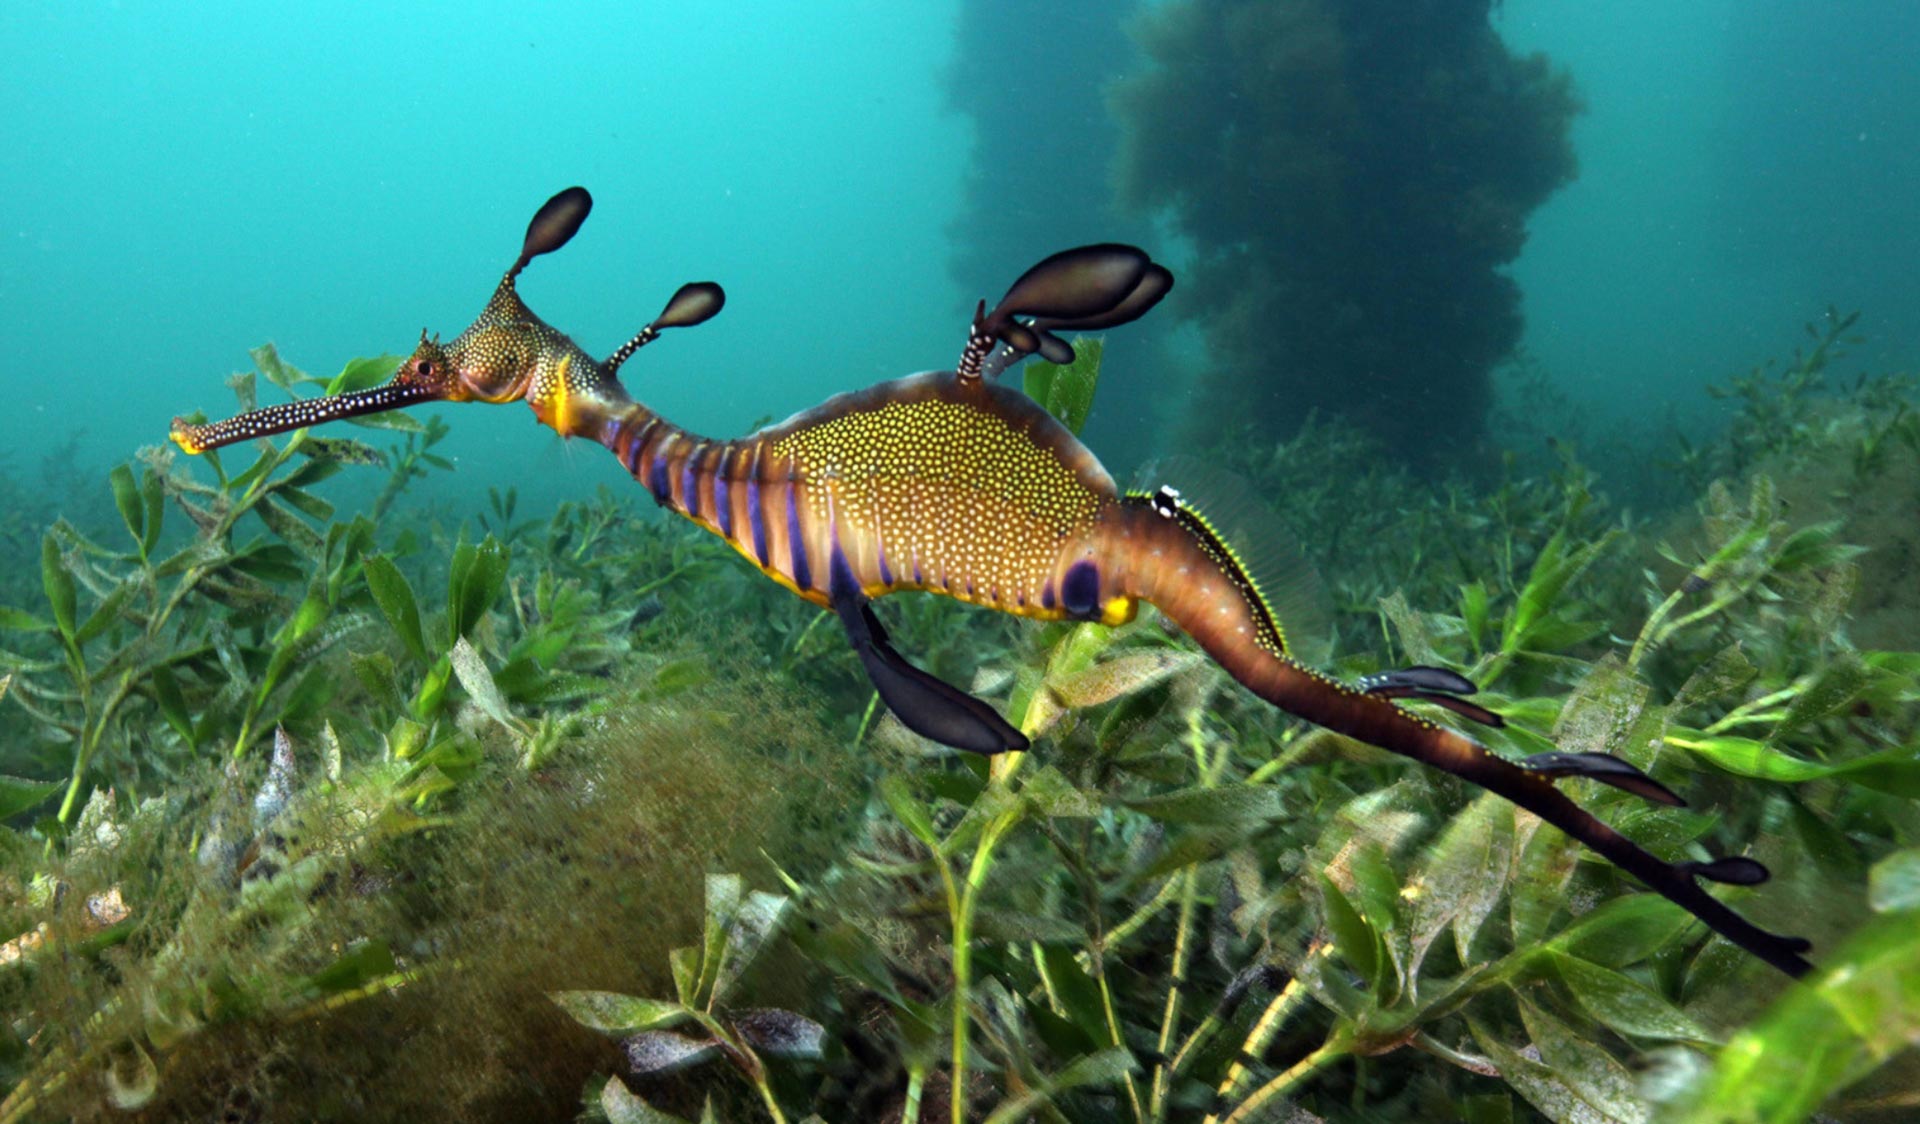 A Weedy Seadragon swims above the seaweed-covered seabed in Western Port.